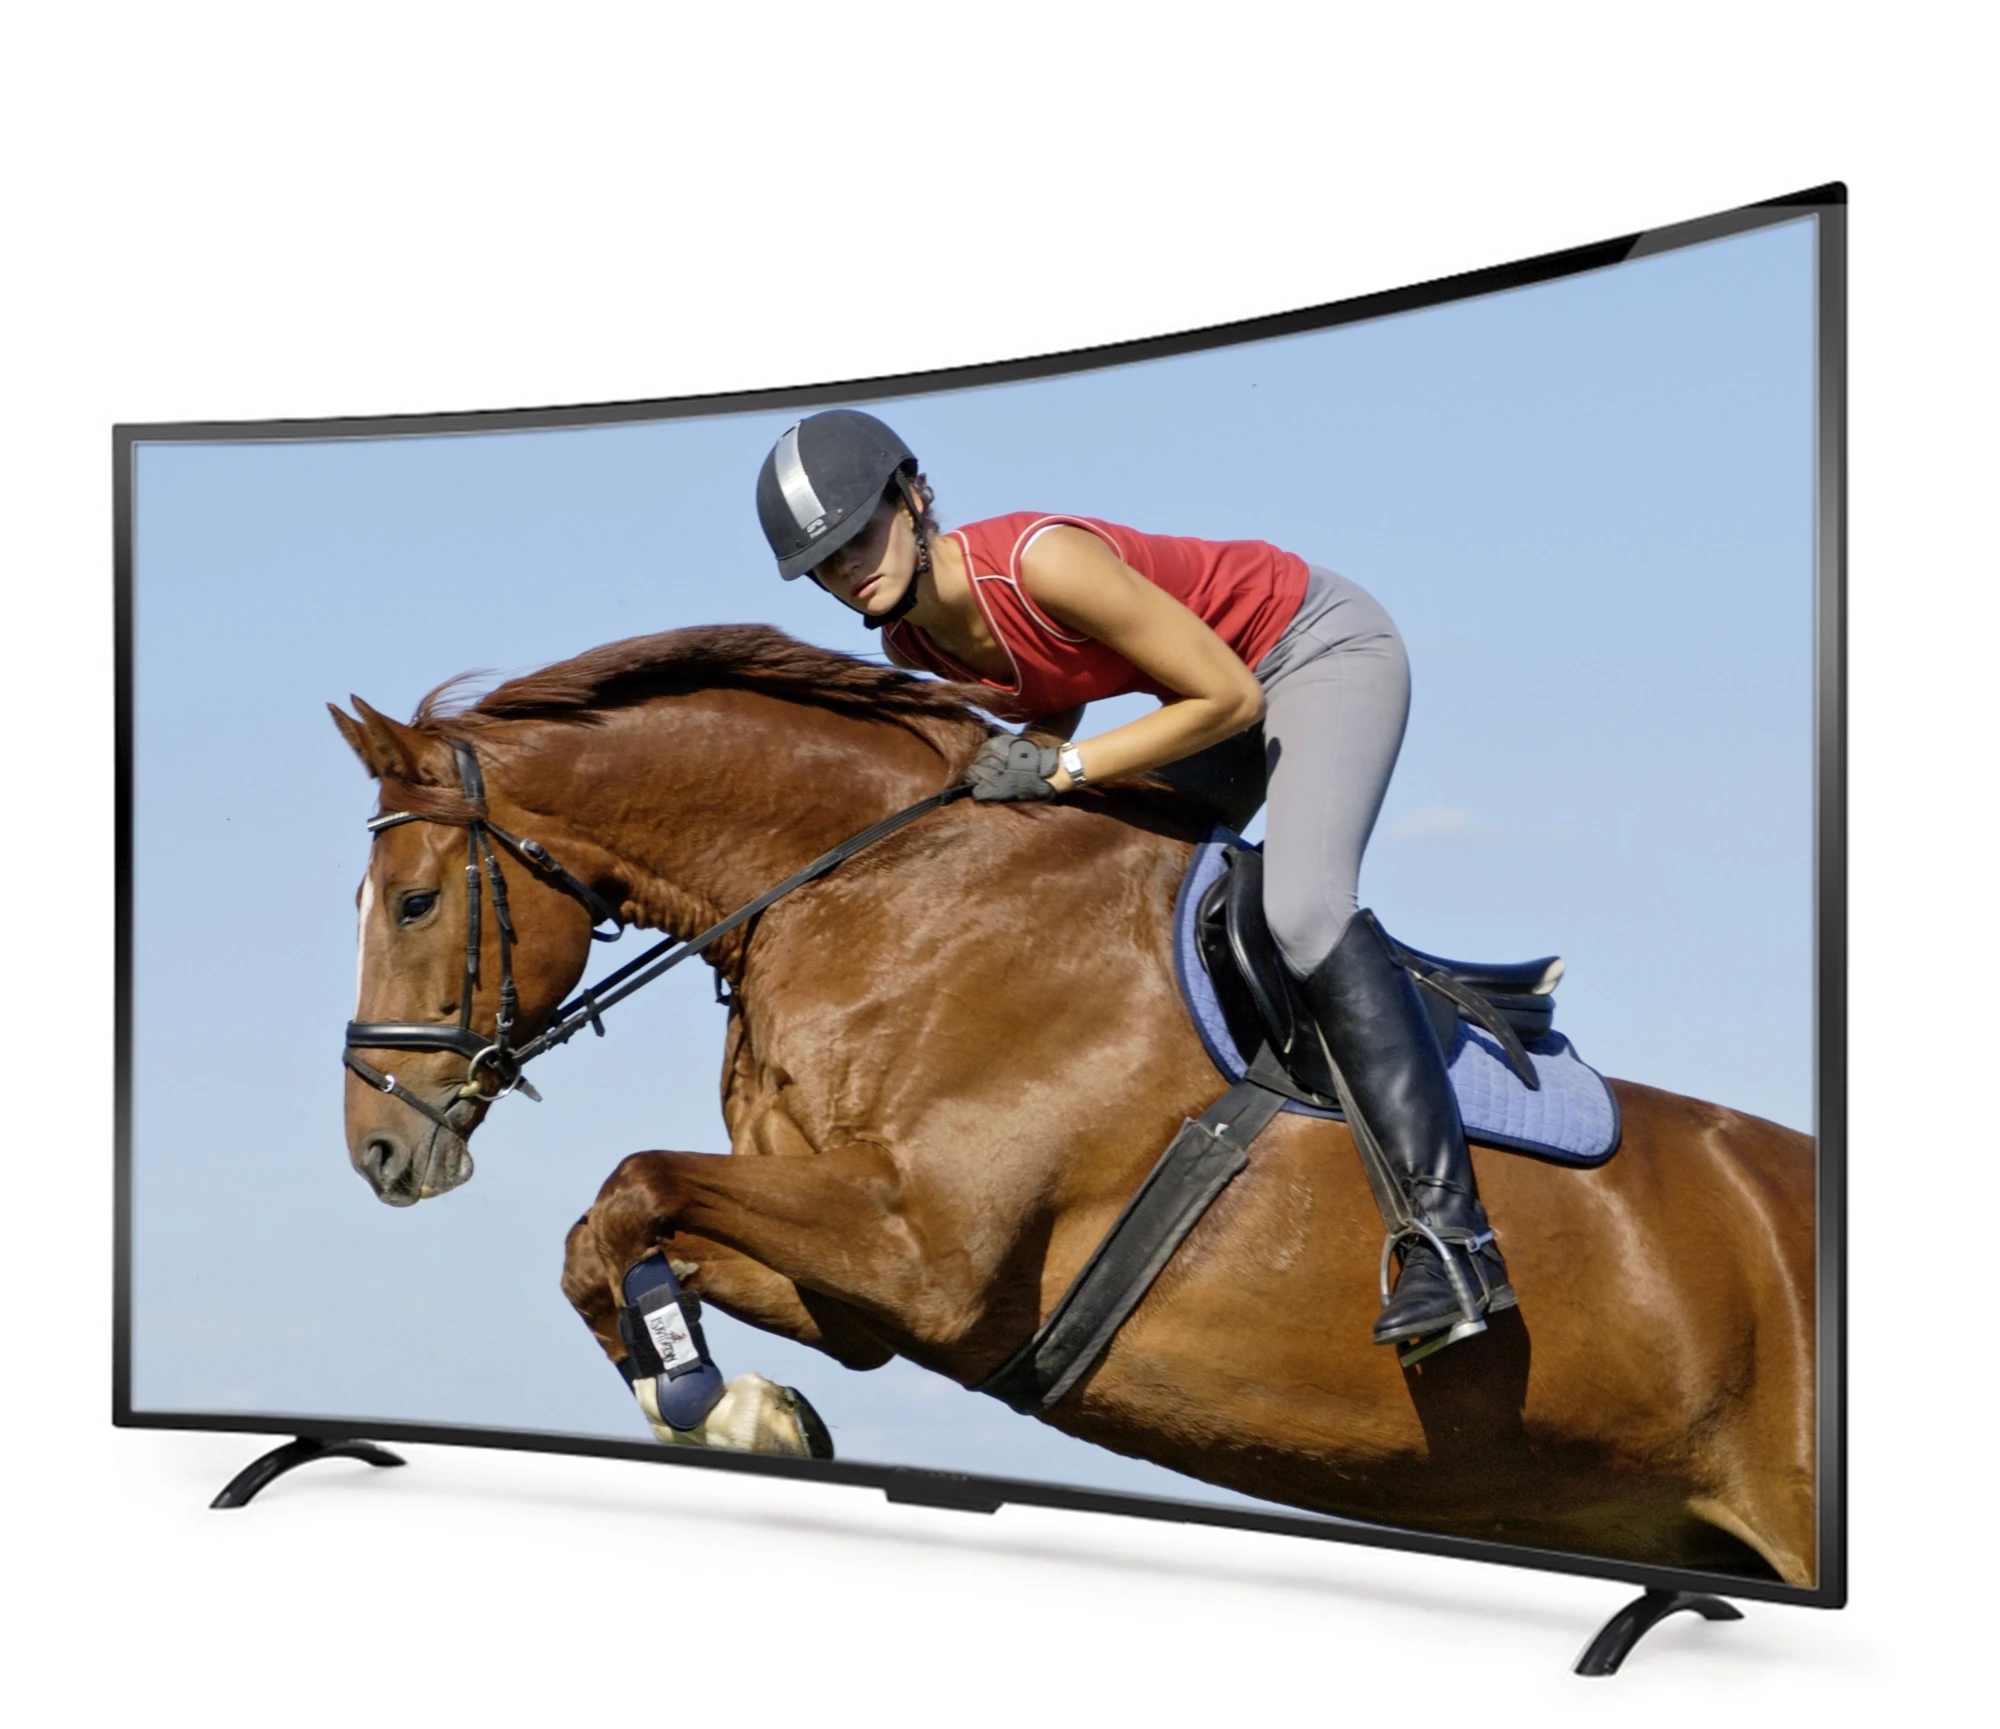 

Cheap 43 inch smart led curved UHD radian FHD LED TV 3840*2160P Super slim4K lcd Television Smart Android TV